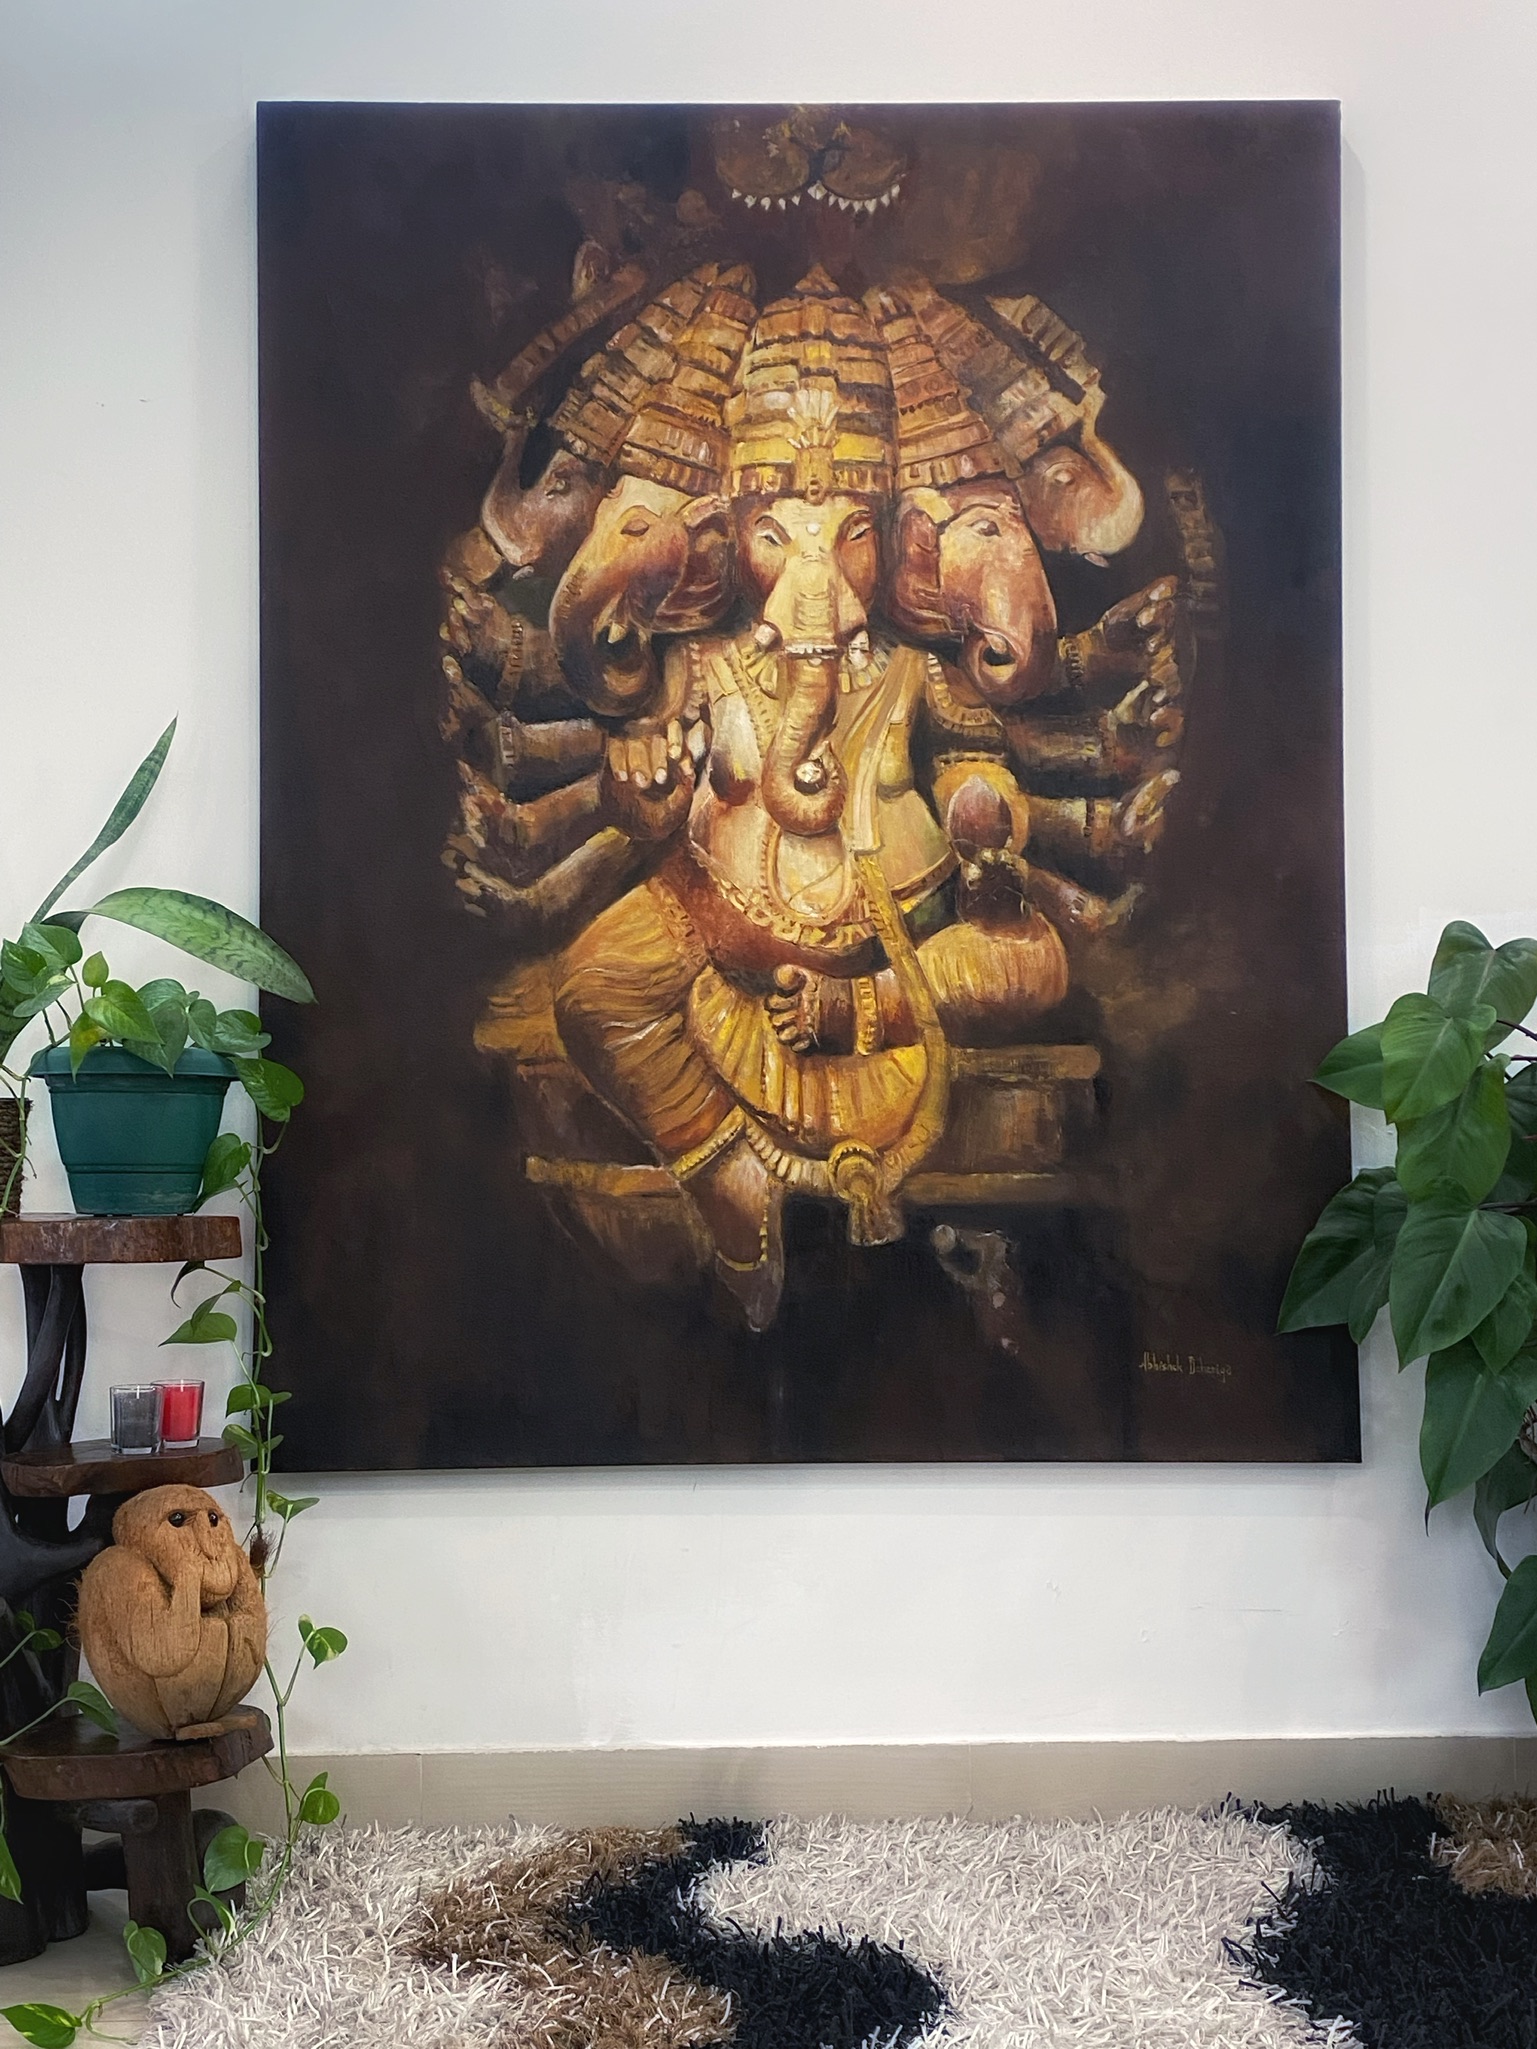 A captivating painting featuring Ganesha, the beloved Hindu deity of wisdom, intellect, and remover of obstacles